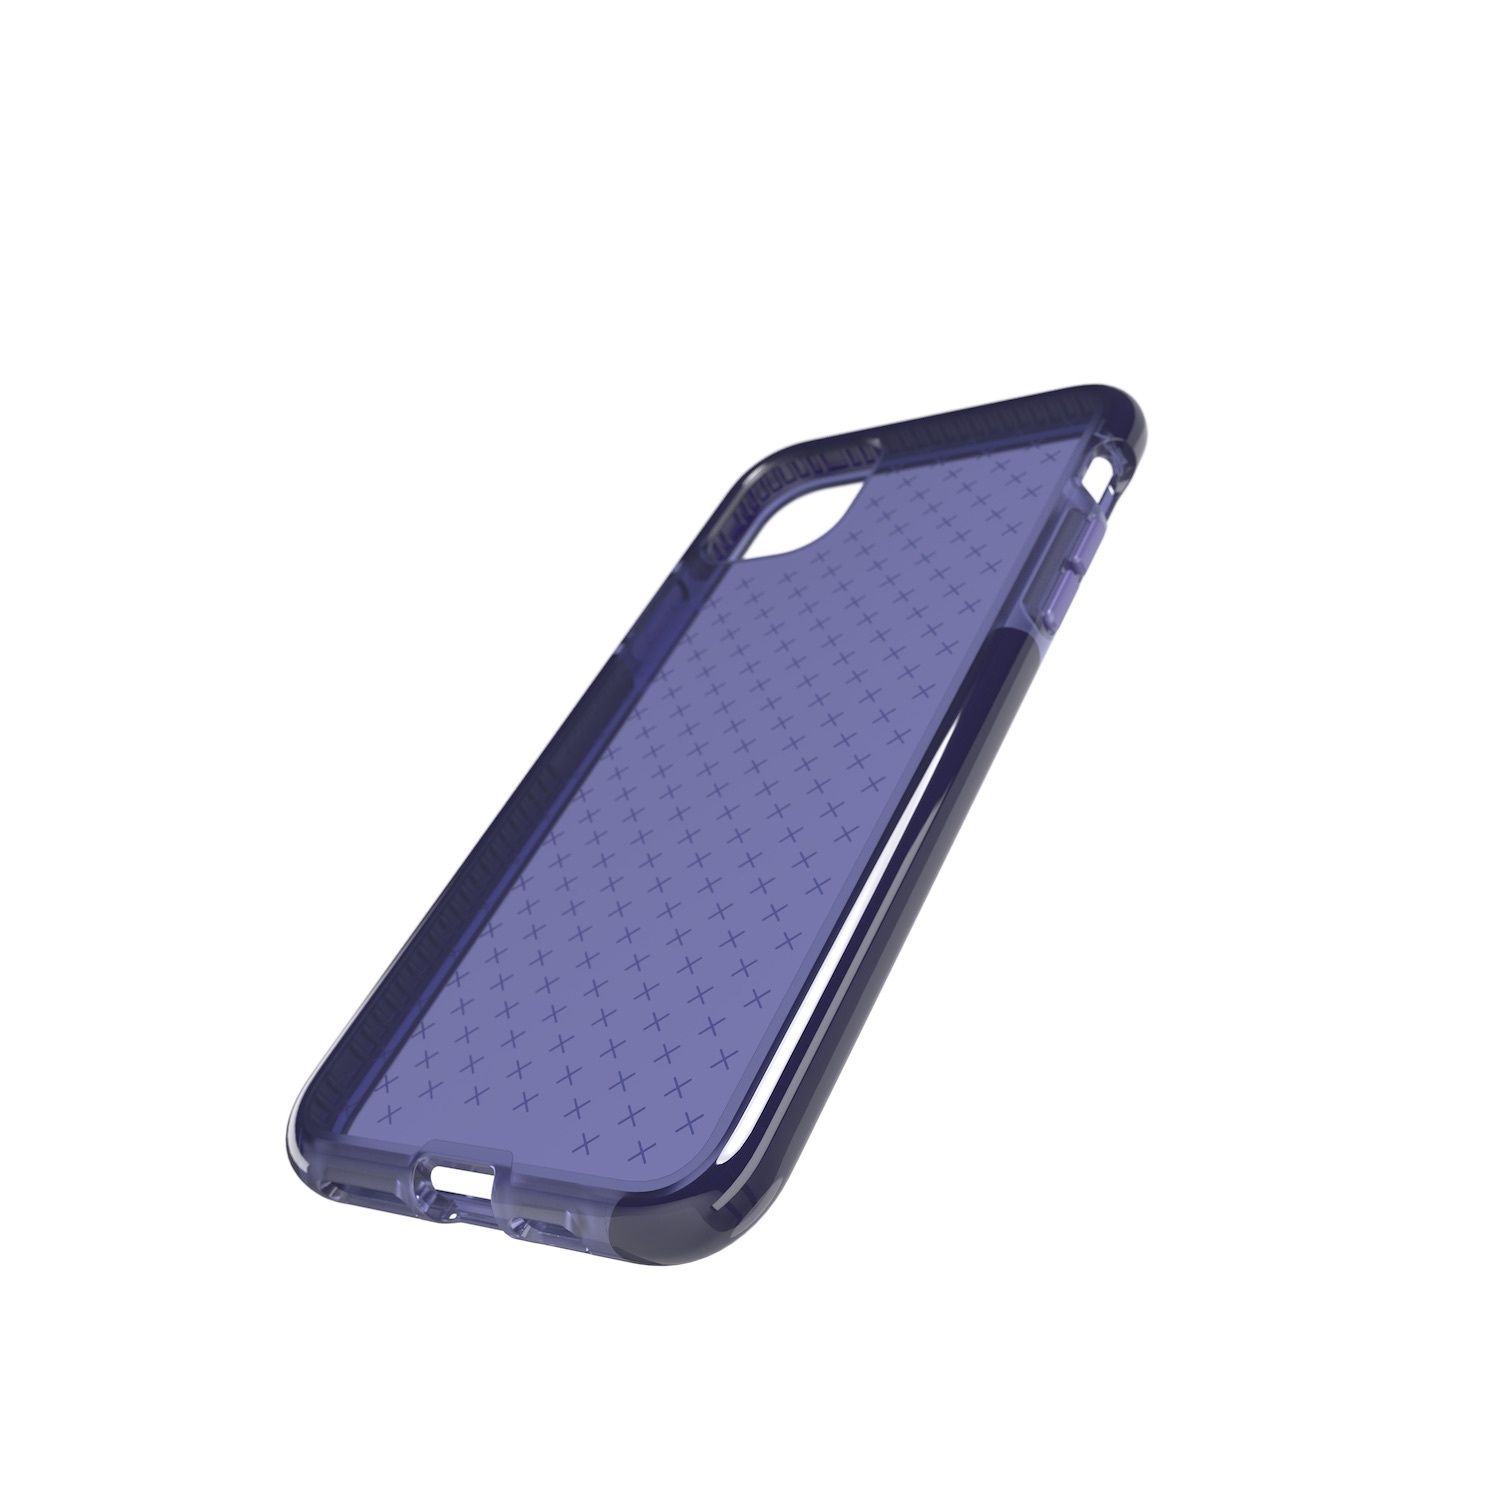 A clear, purplish-blue case with small cross marks along the back